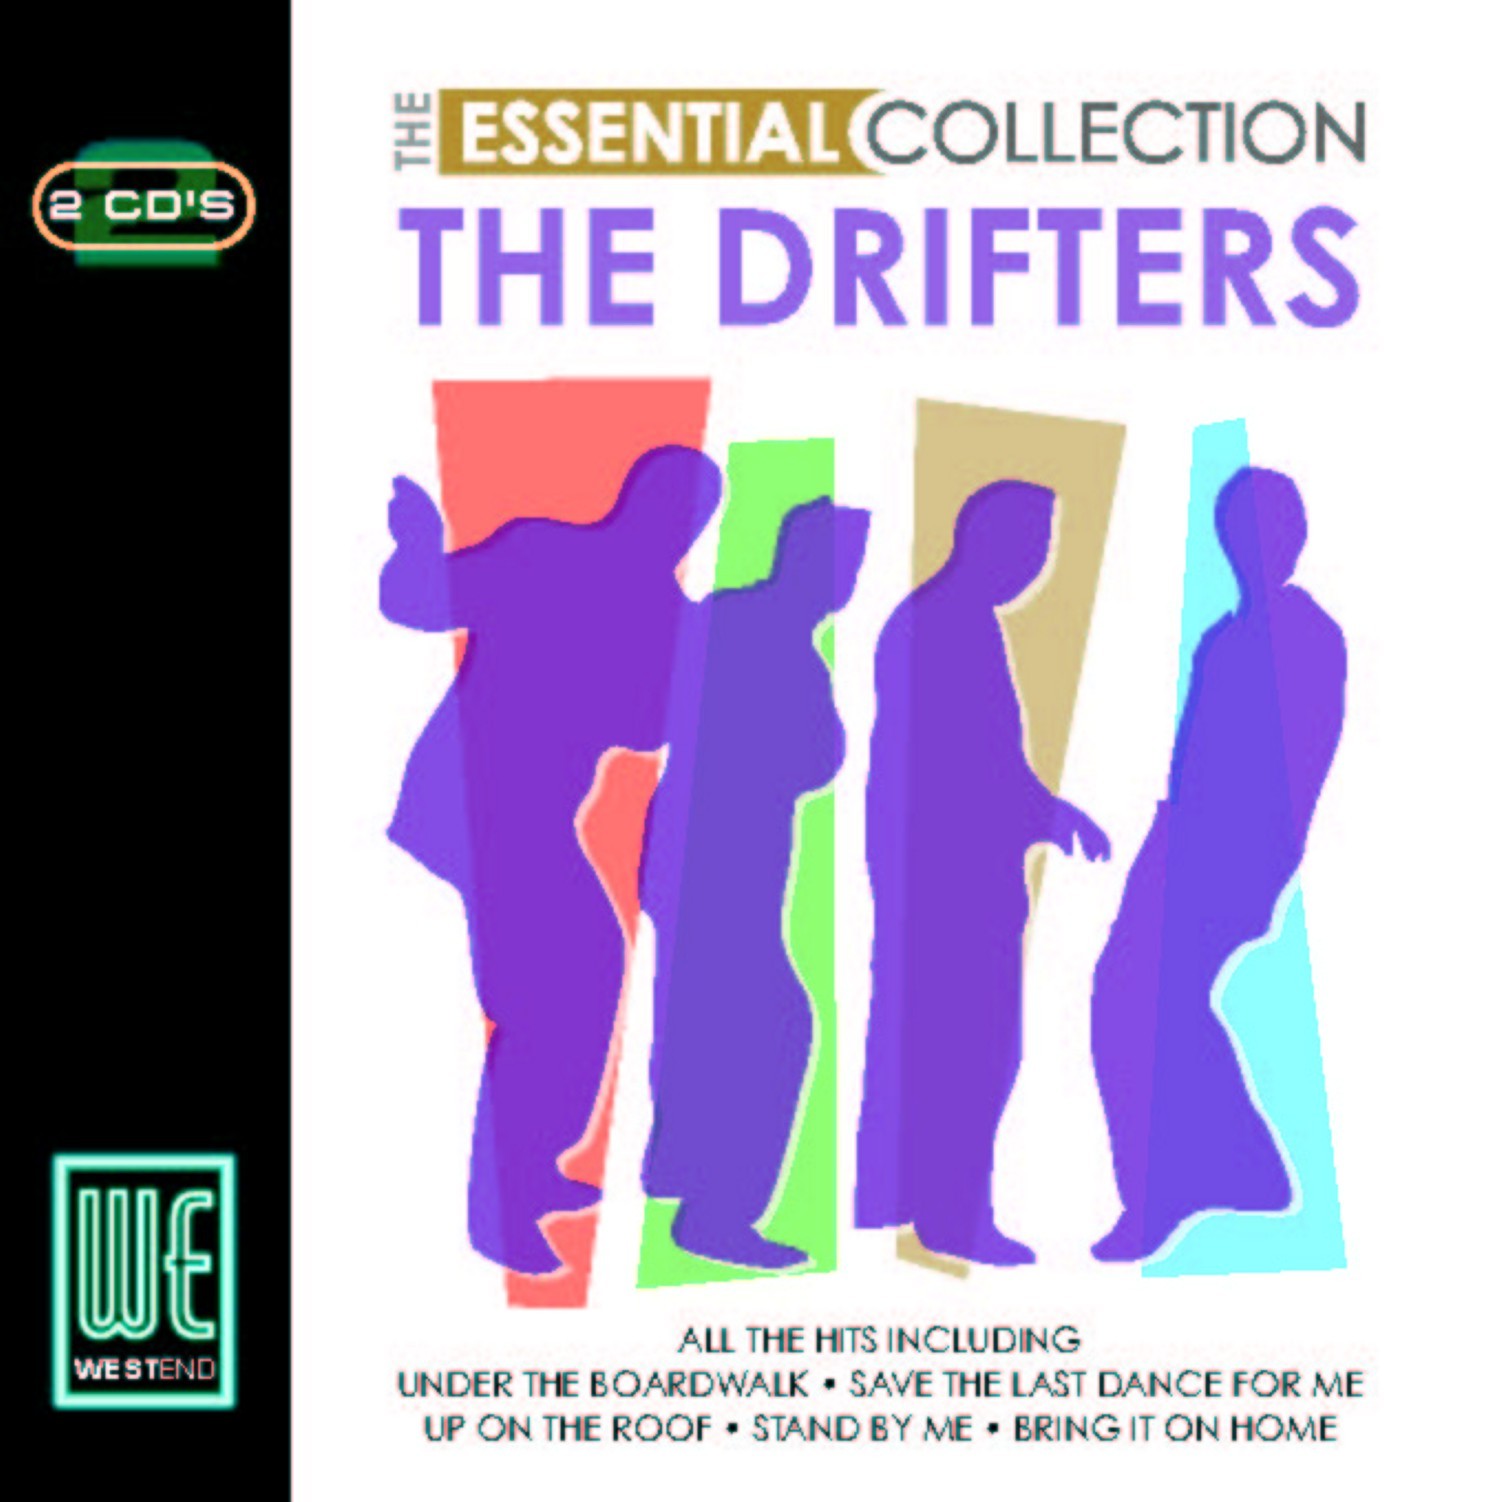 The Very Best Of The Drifters 50 Great Songs 2 CD Set Up on the